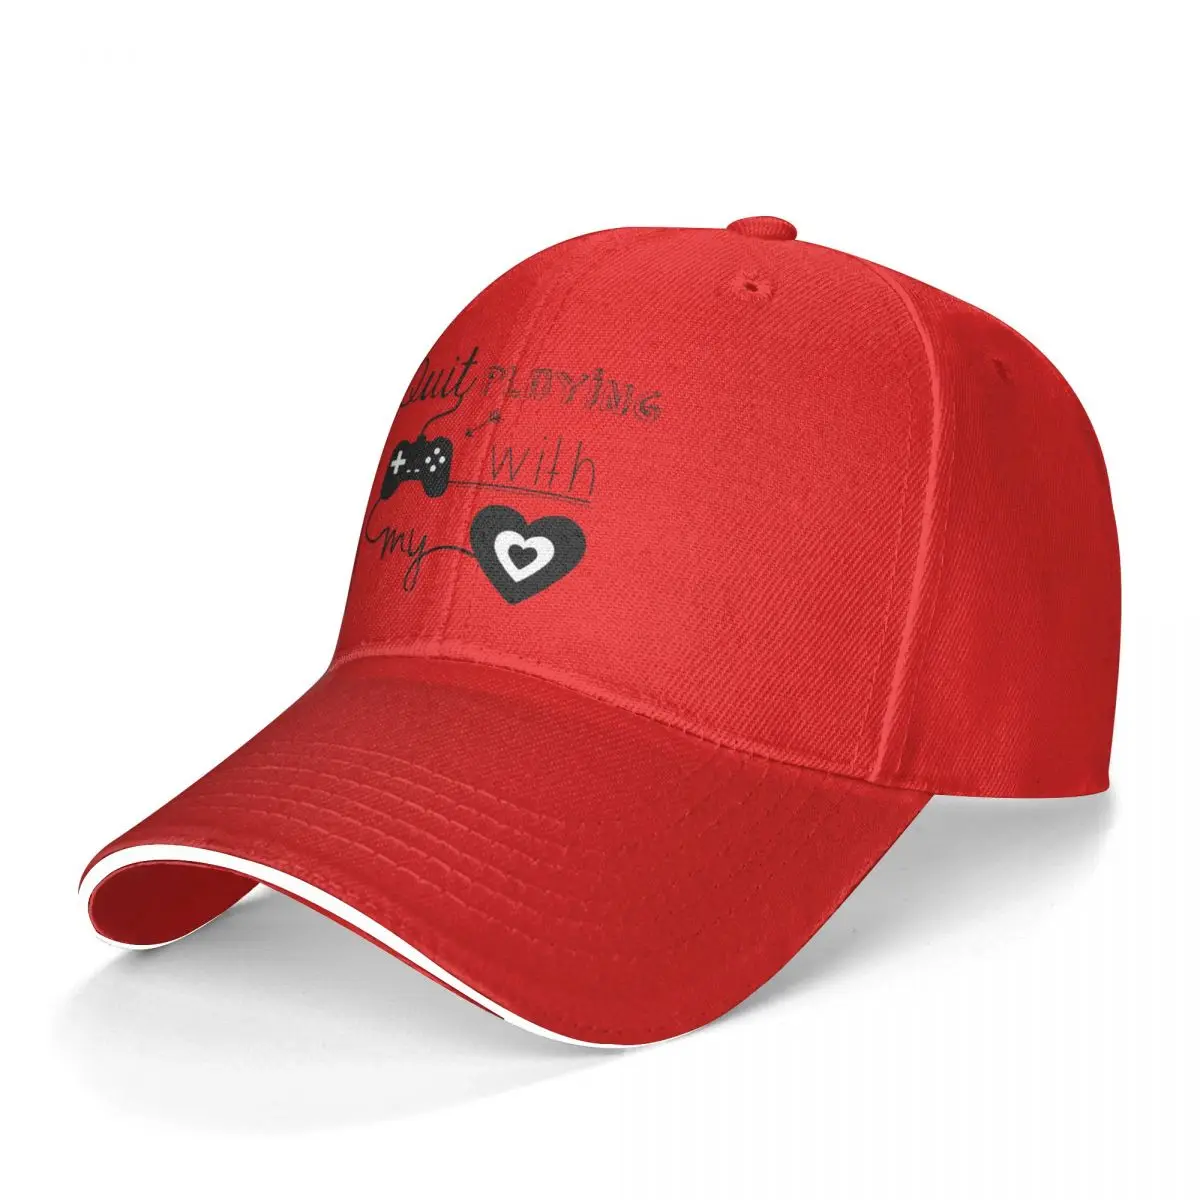 Backstreet Boys Baseball Cap BSB Quit Playing Games With My Heart Outdoor Trucker Hat Wholesale Unisex Cool Print Baseball Caps